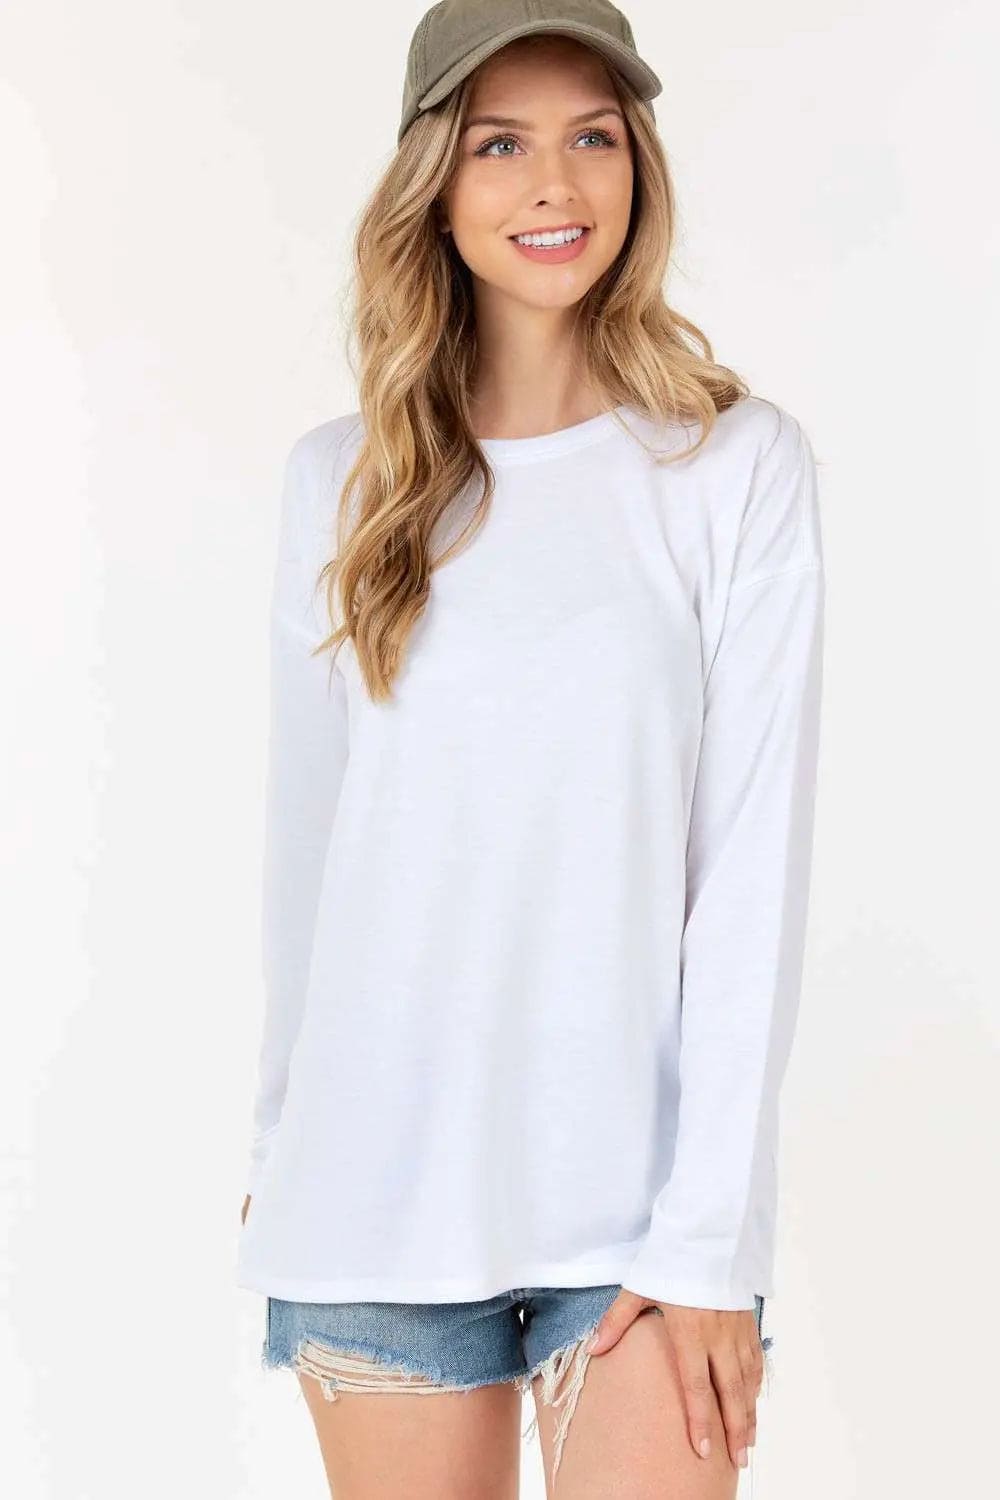 Solid White Long Sleeve Top The Magnolia Cottage Boutique